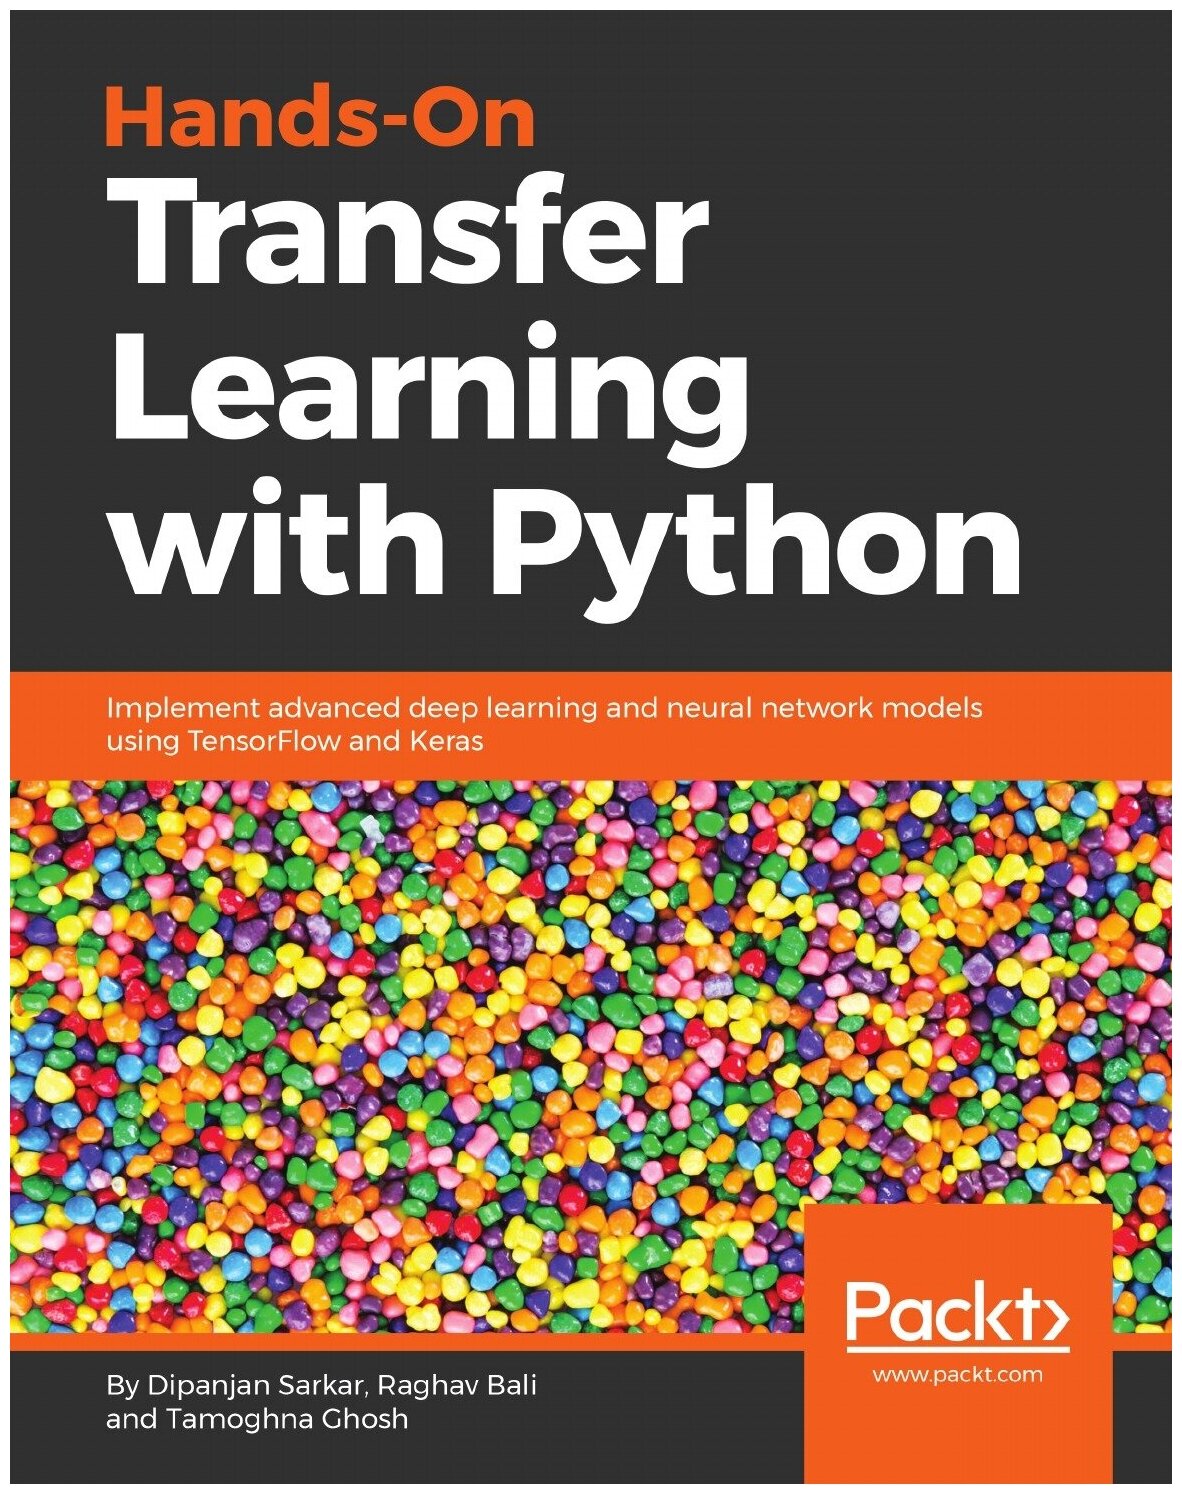 Hands-On Transfer Learning with Python. Implement advanced deep learning and neural network models using TensorFlow and Keras